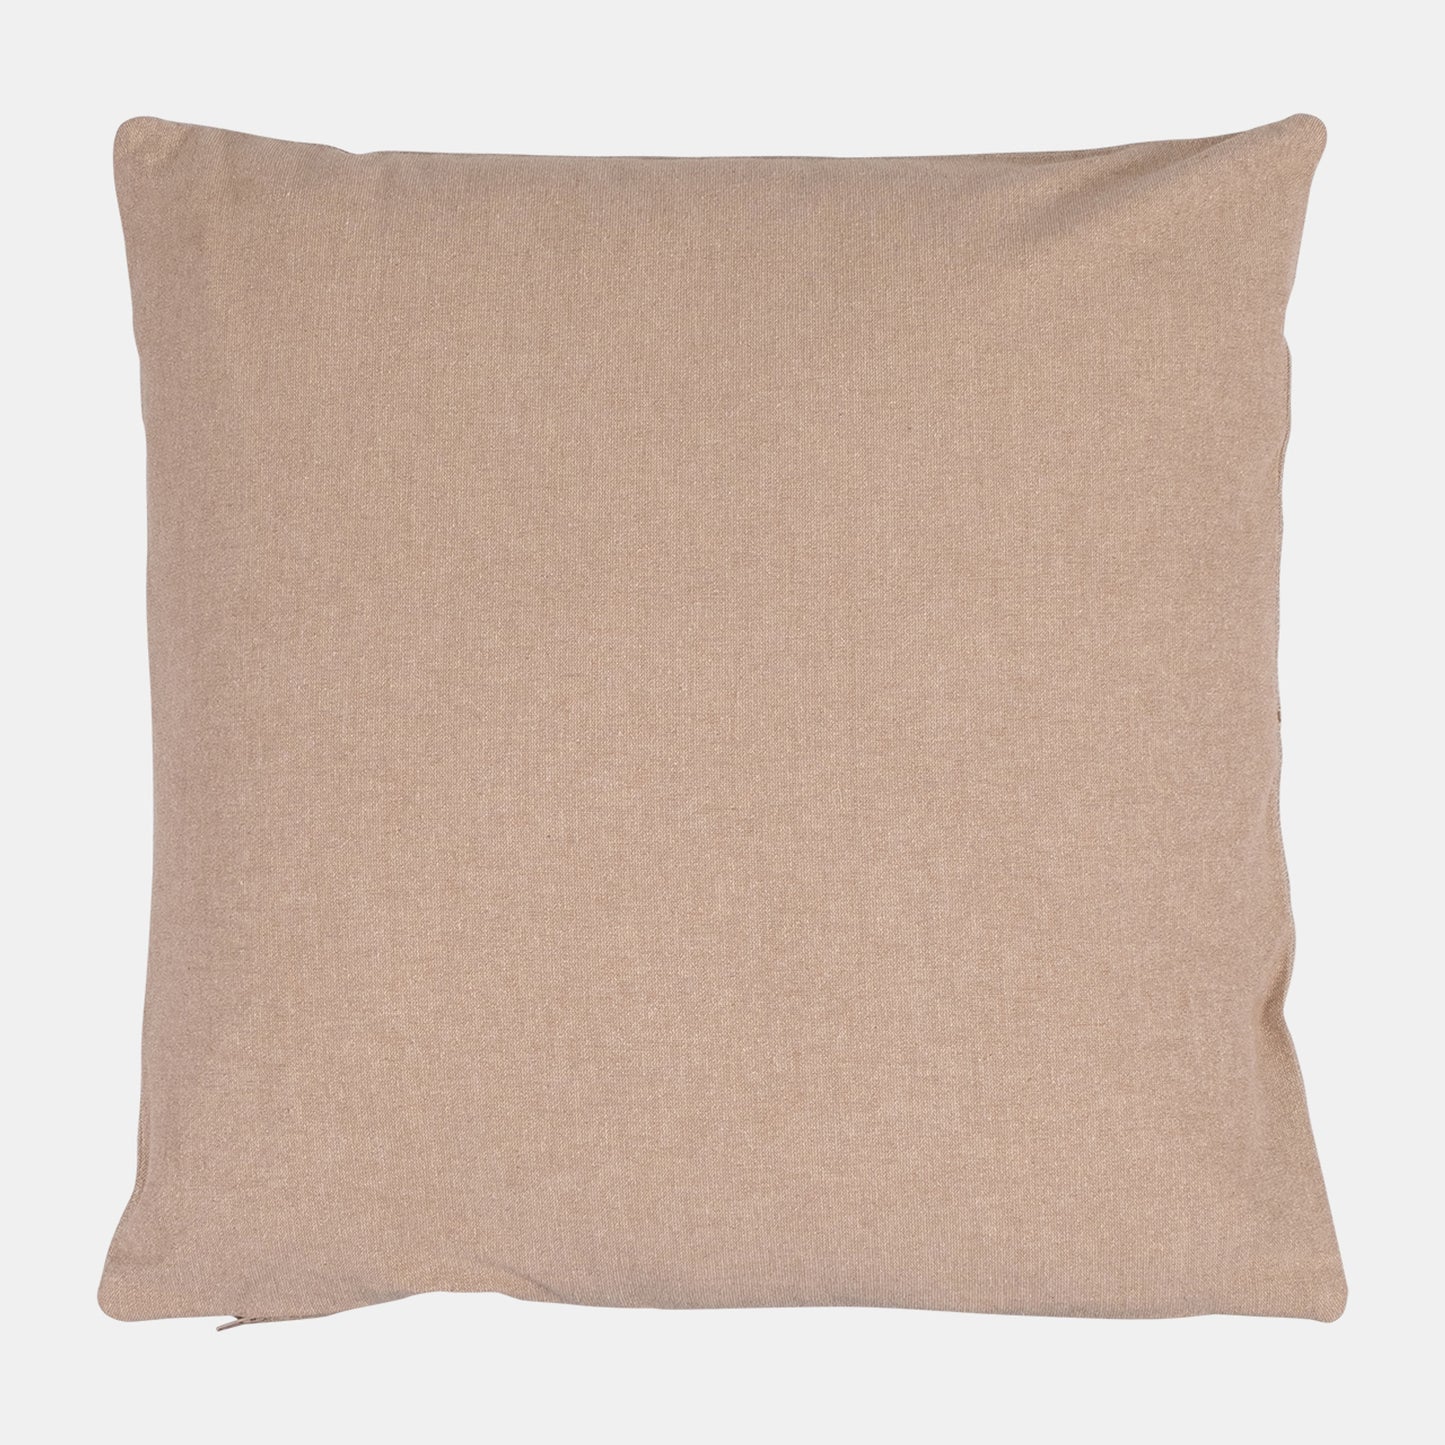 20 x 20 in. Leather Patch Decorative Square Pillow; Beige